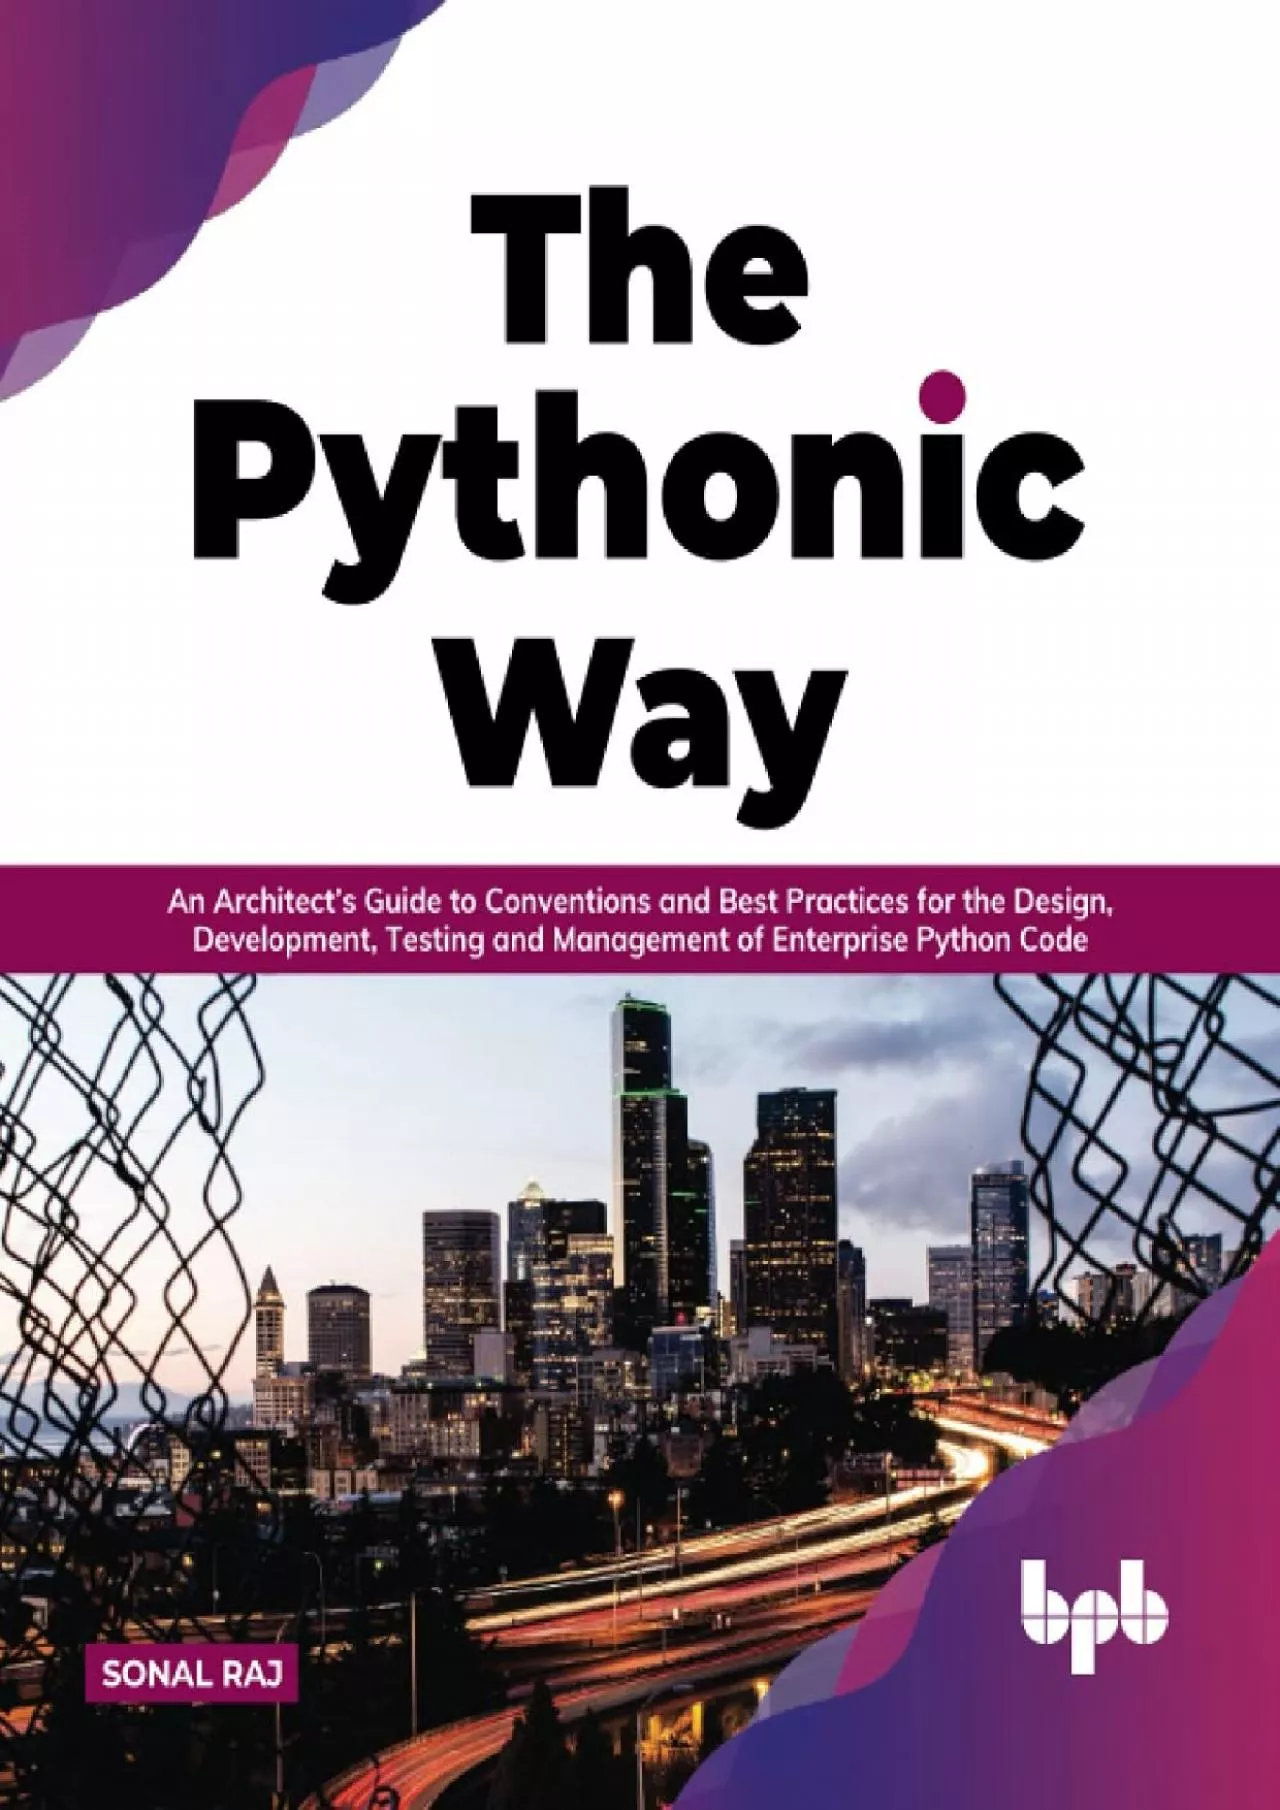 [BEST]-The Pythonic Way An Architect’s Guide to Conventions and Best Practices for the